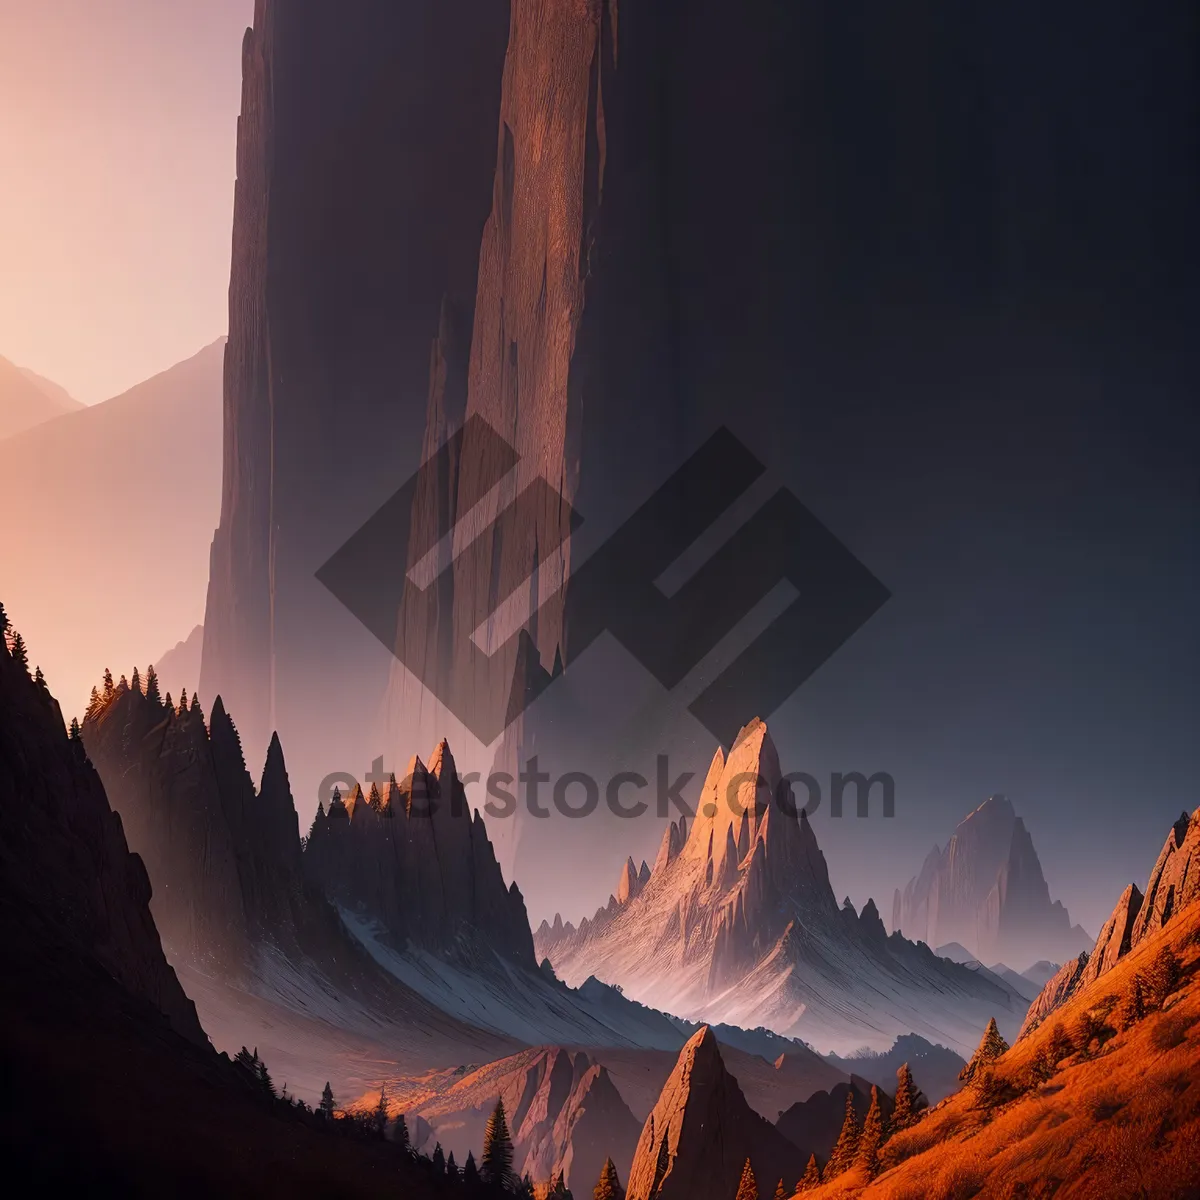 Picture of Majestic Mountain Range with Glaciers and Snow-Capped Peaks